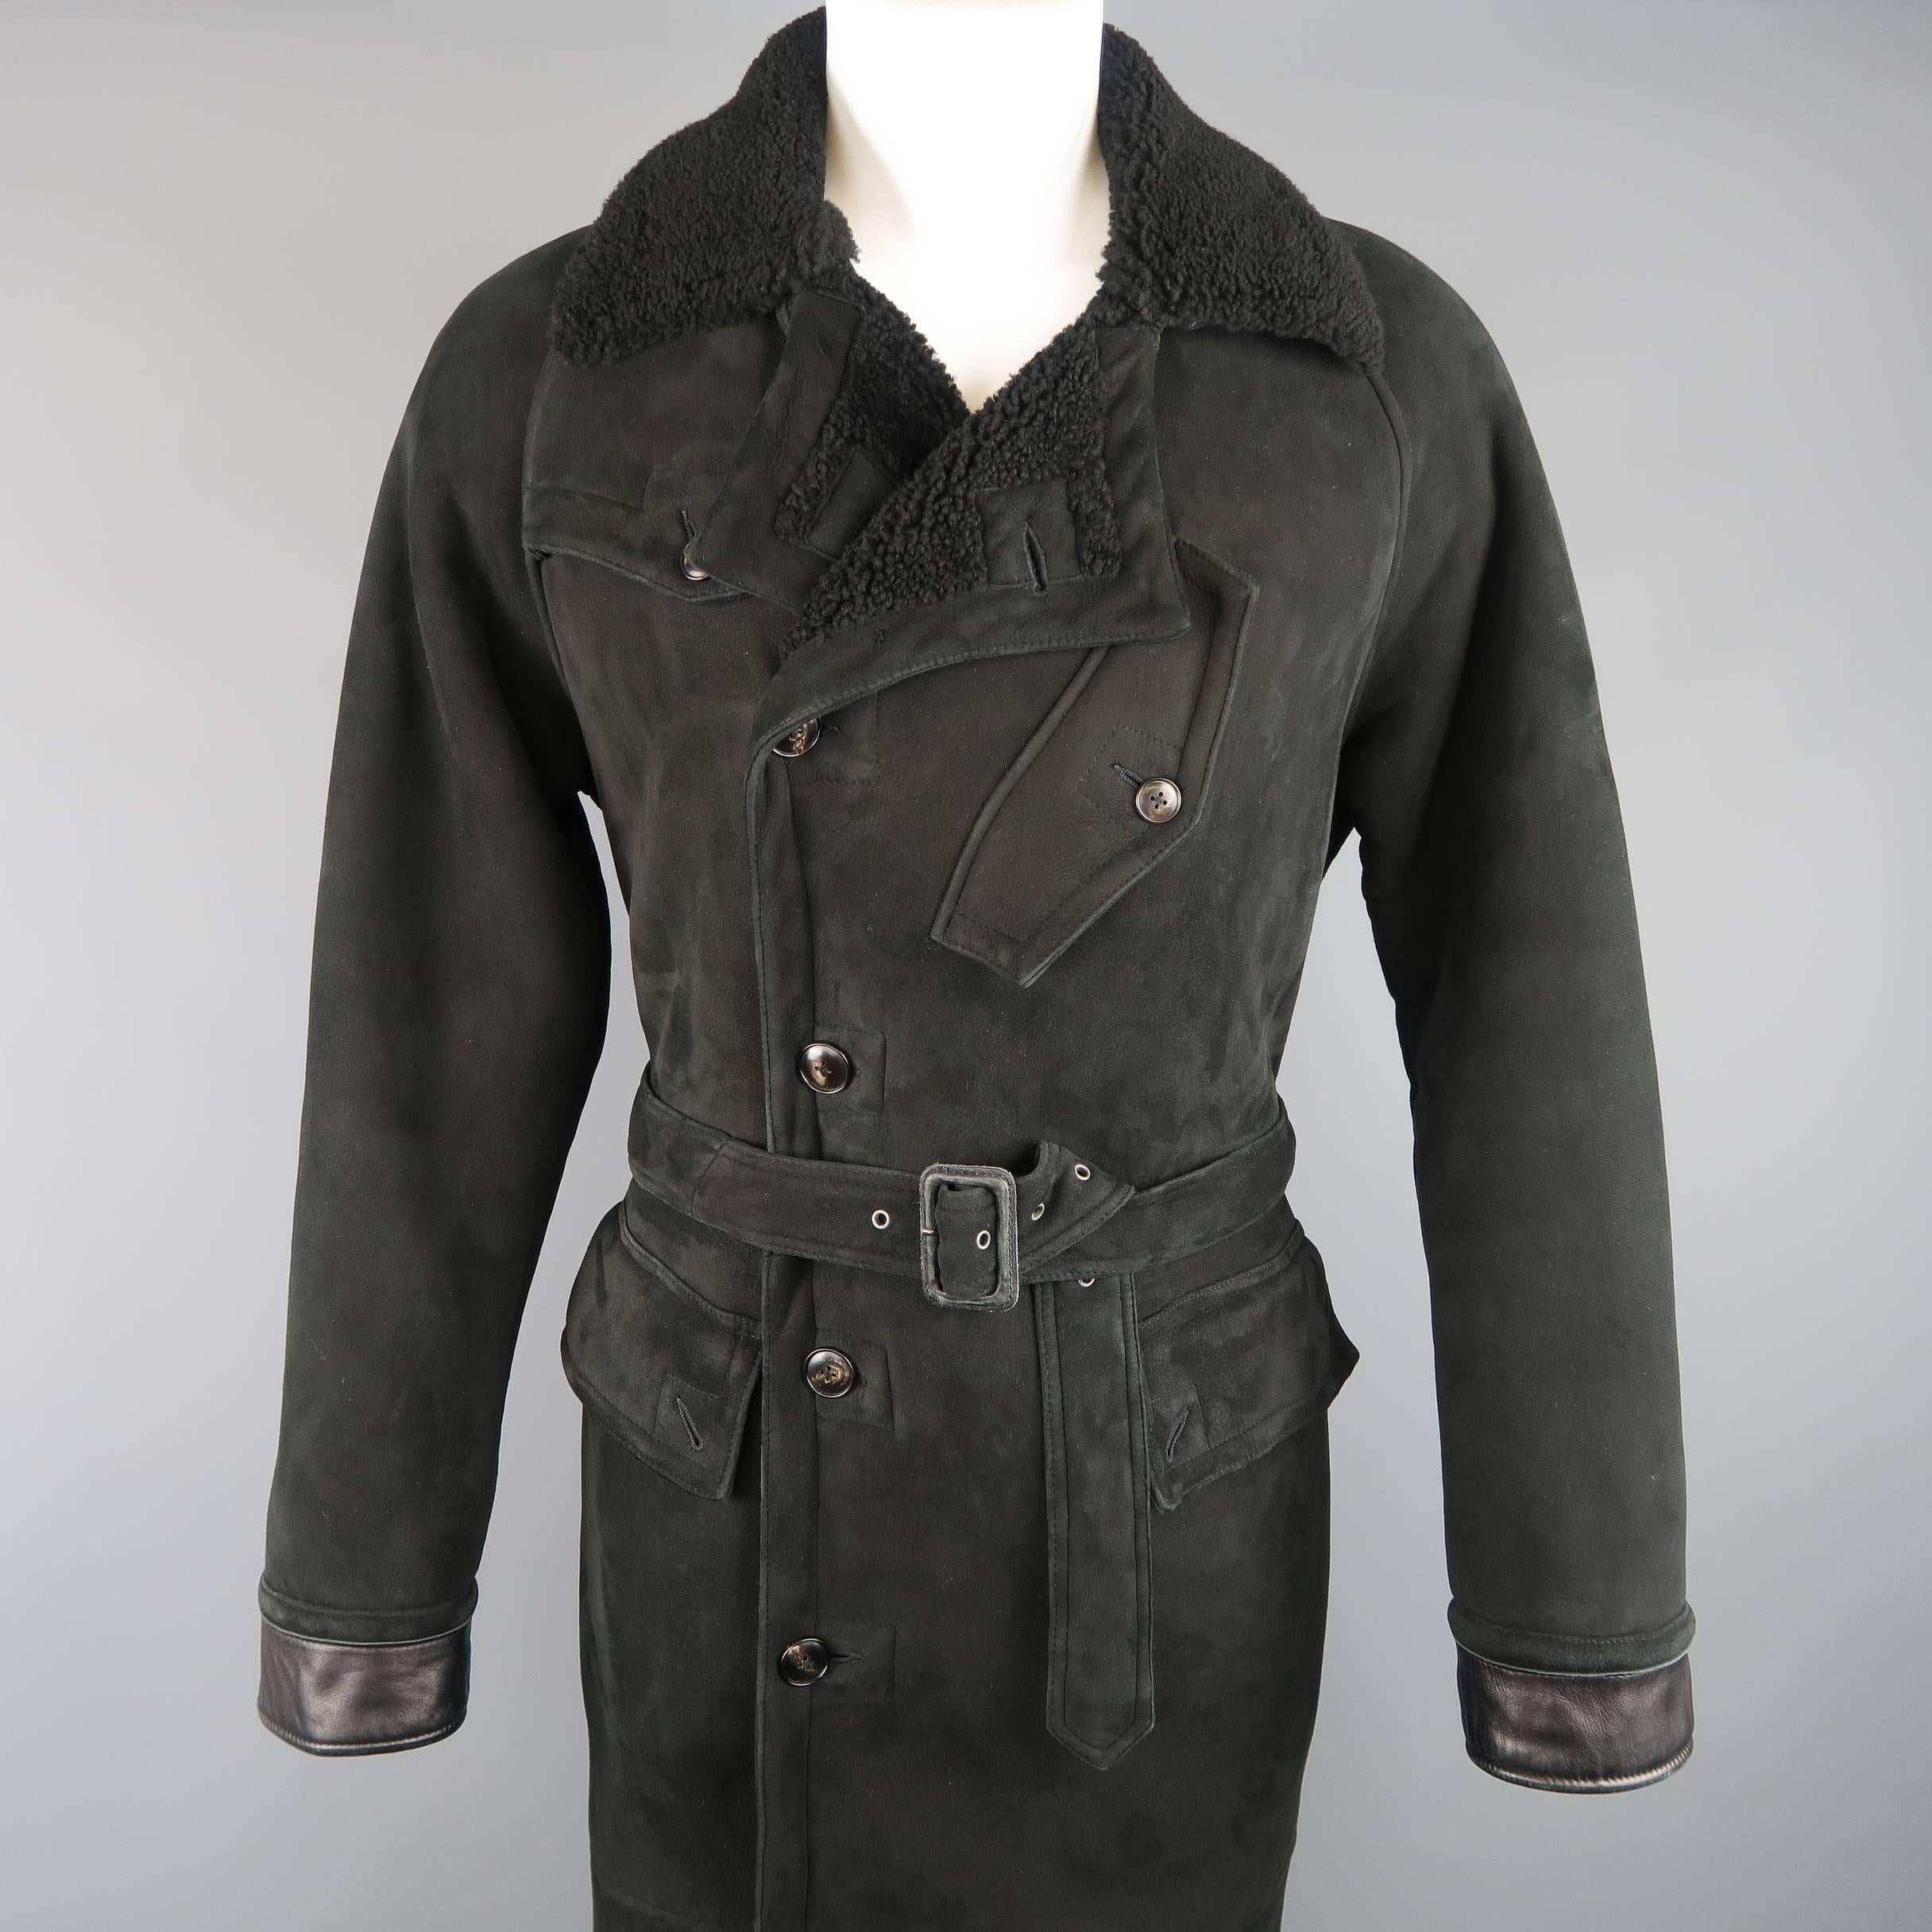 POLO RALPH LAUREN overcoat comes in black Italian Shearling and features a large pointed fur collar, double breasted button front, double flap pockets, slanted chest pocket, storm flap, leather cuffs, fulll fur lining, and belted waist. Wear